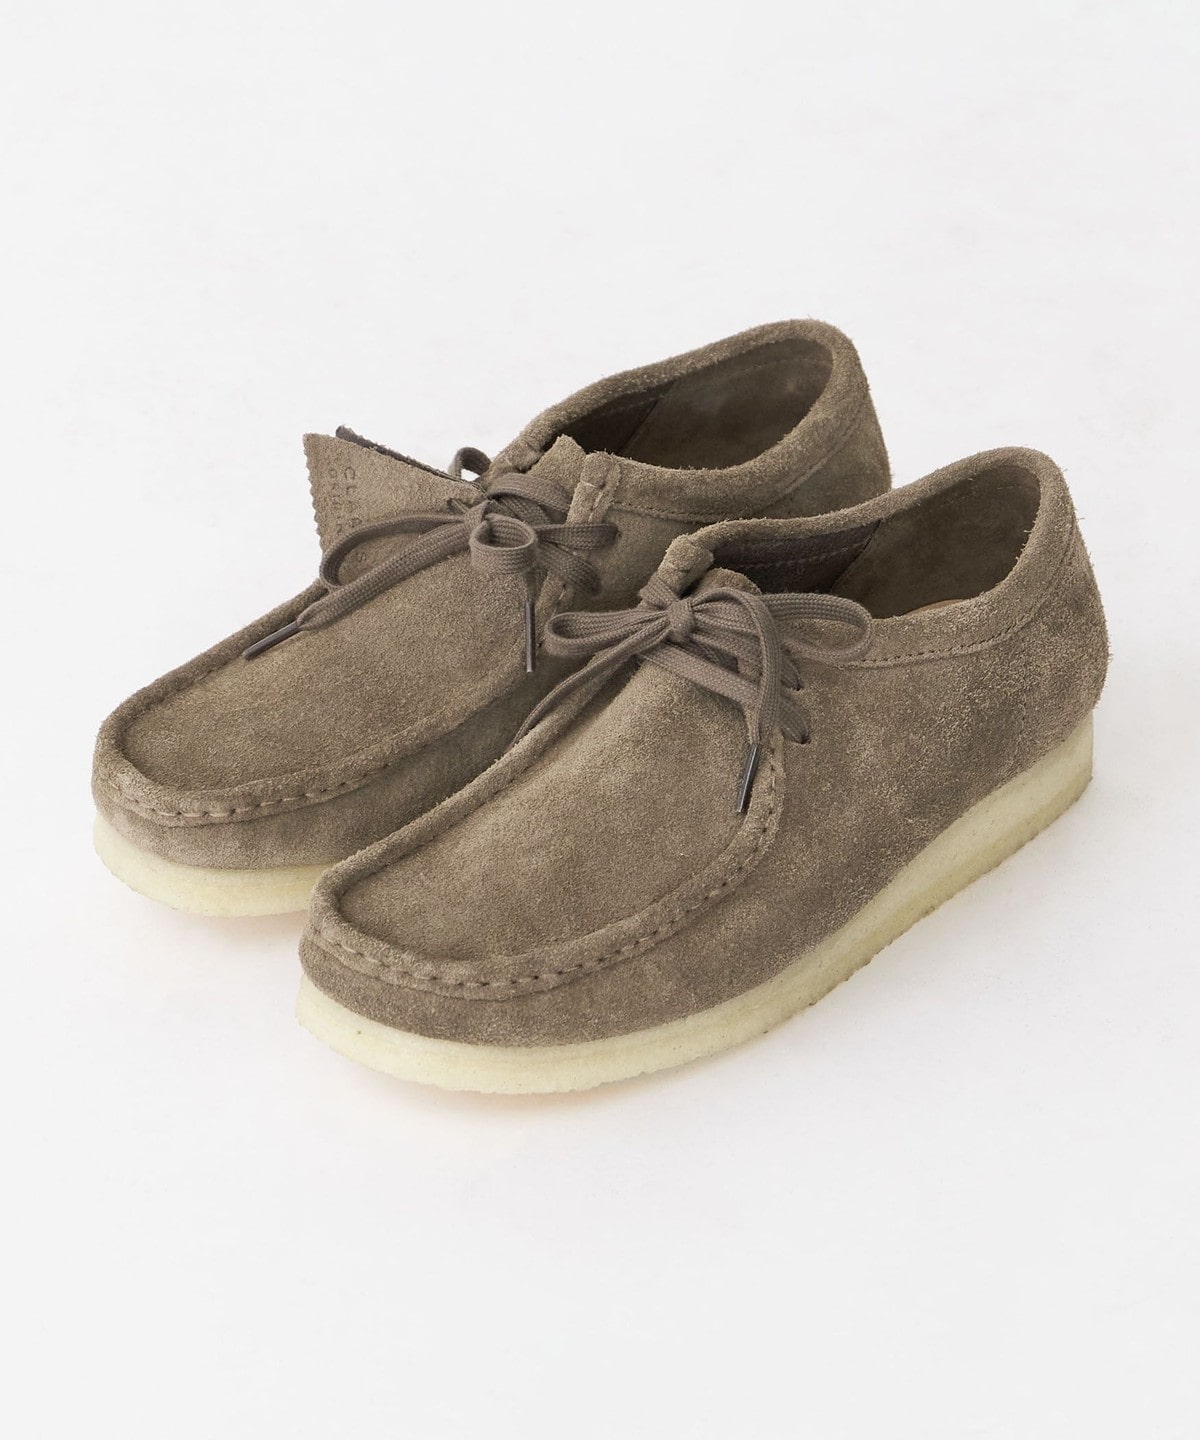 【SHIPS限定】CLARKS: WALLABEE SUEDE チャコールグレー